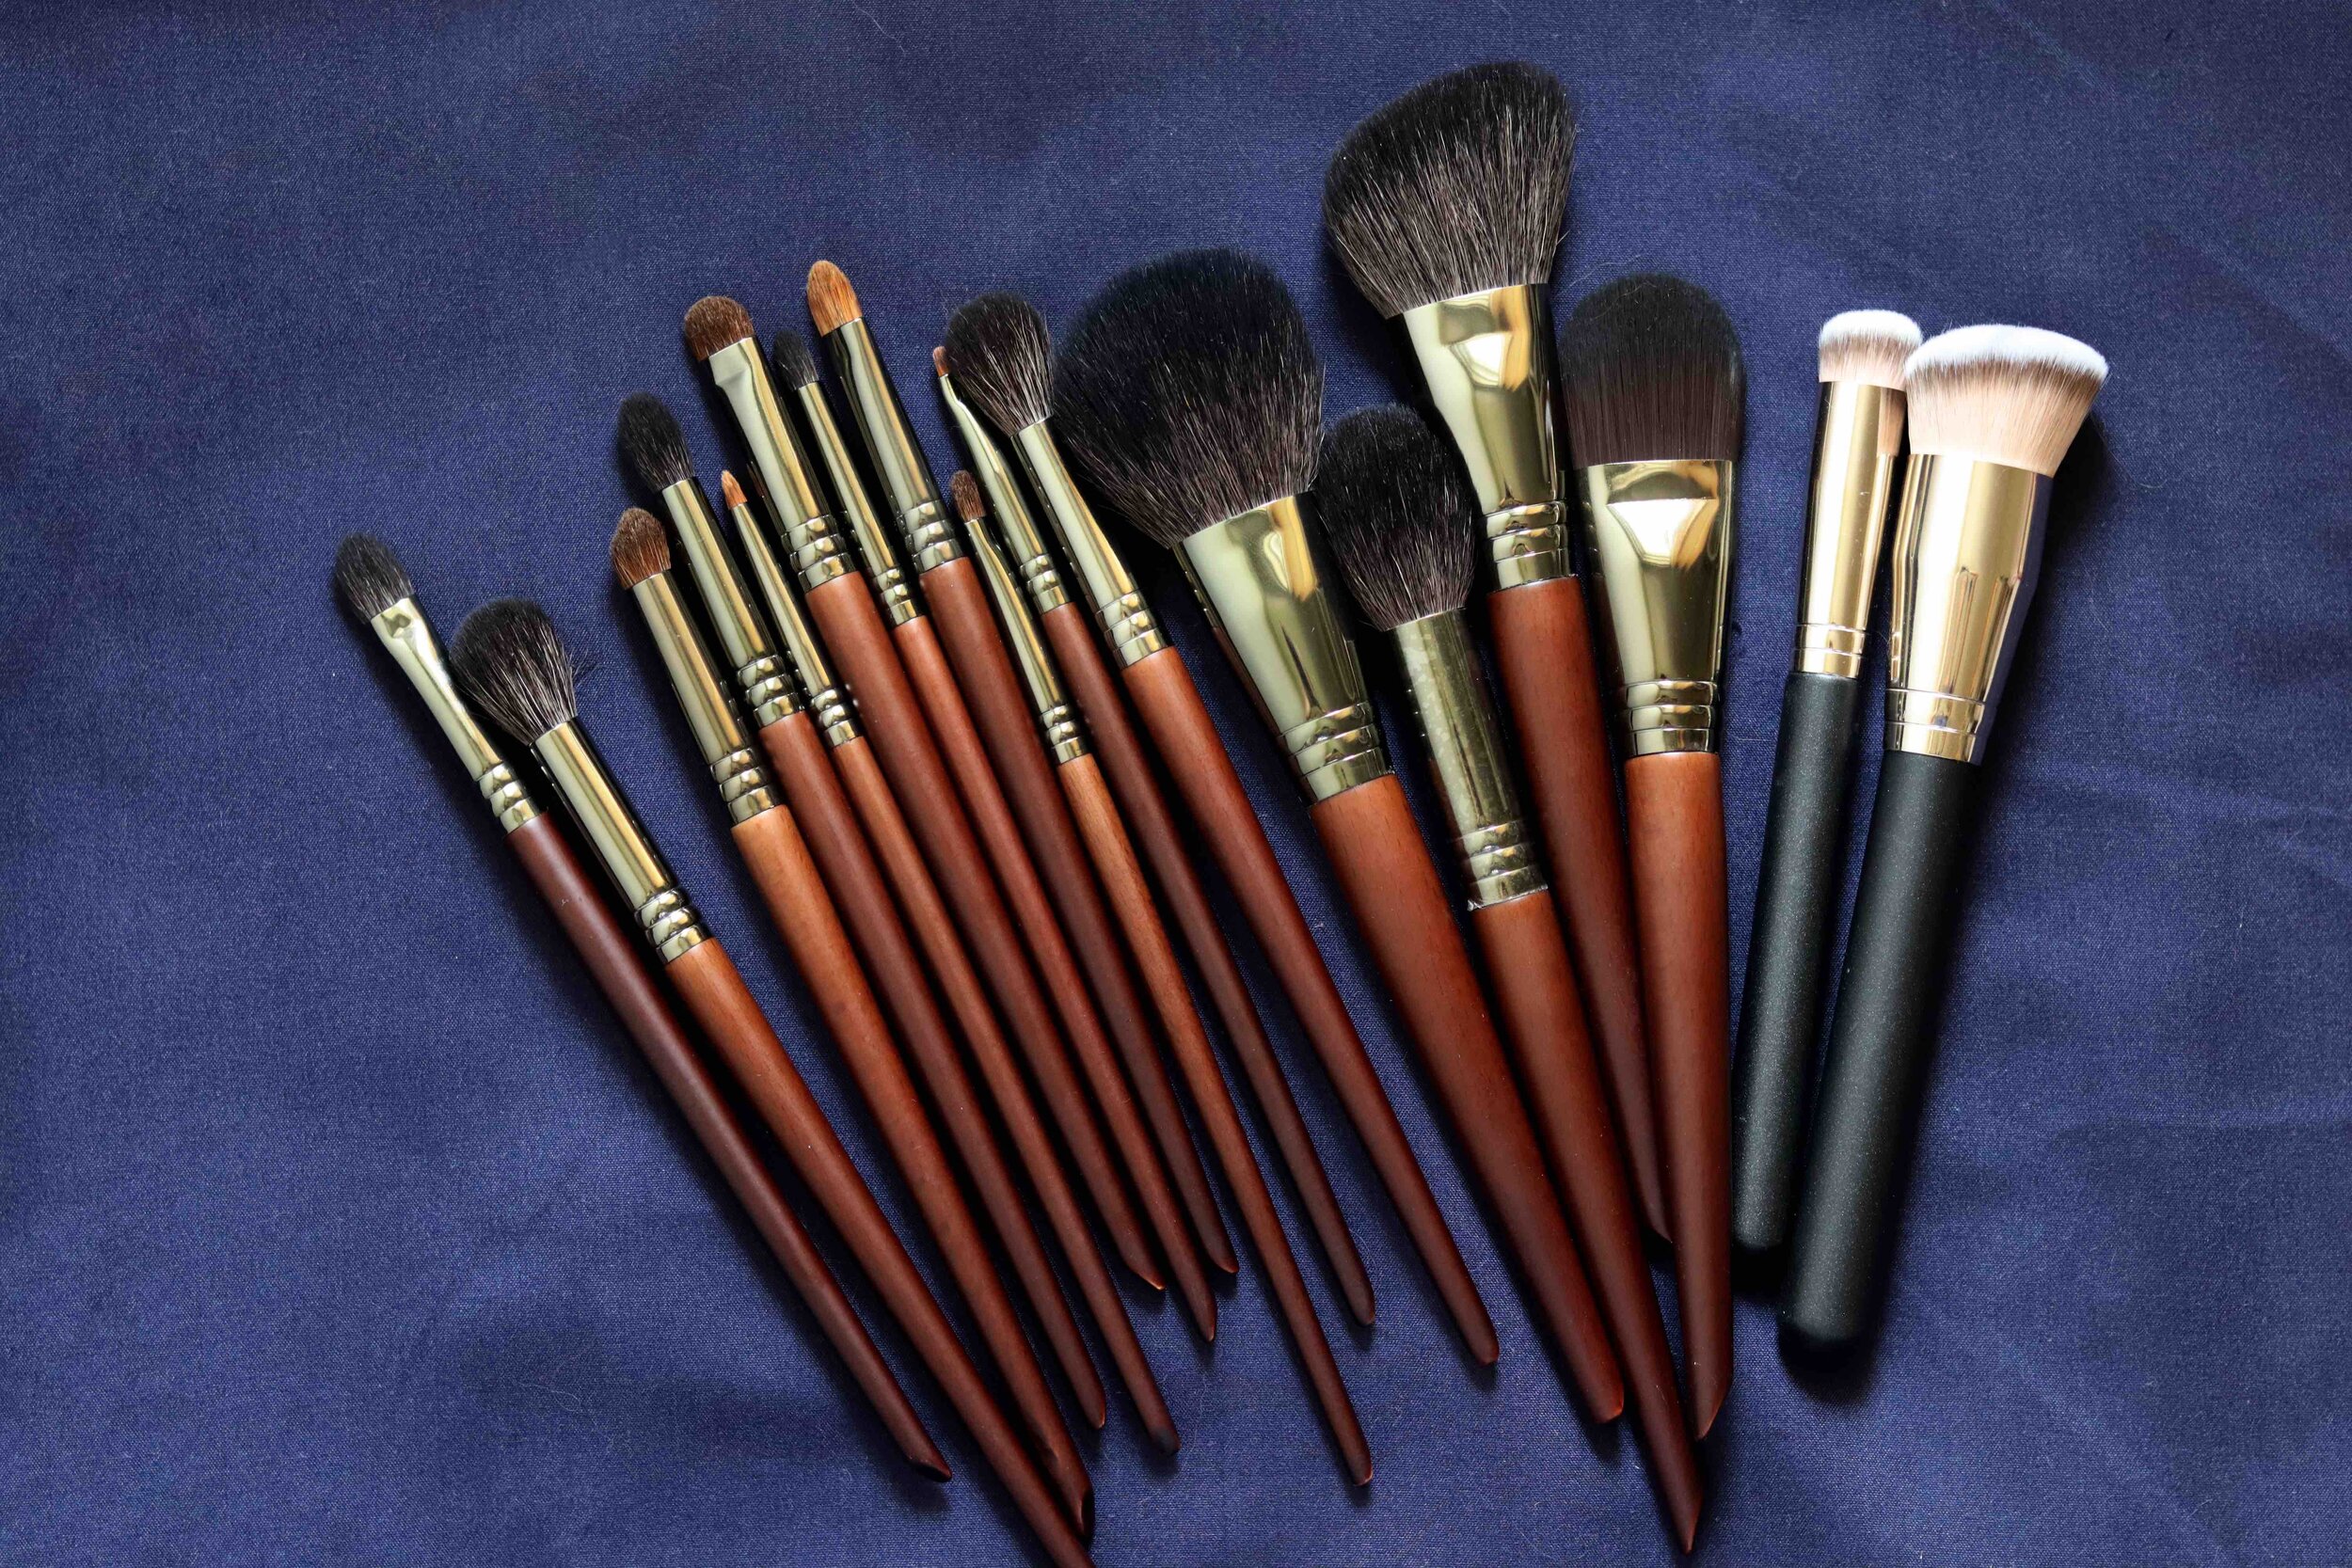 Regarding Brushes and other tools